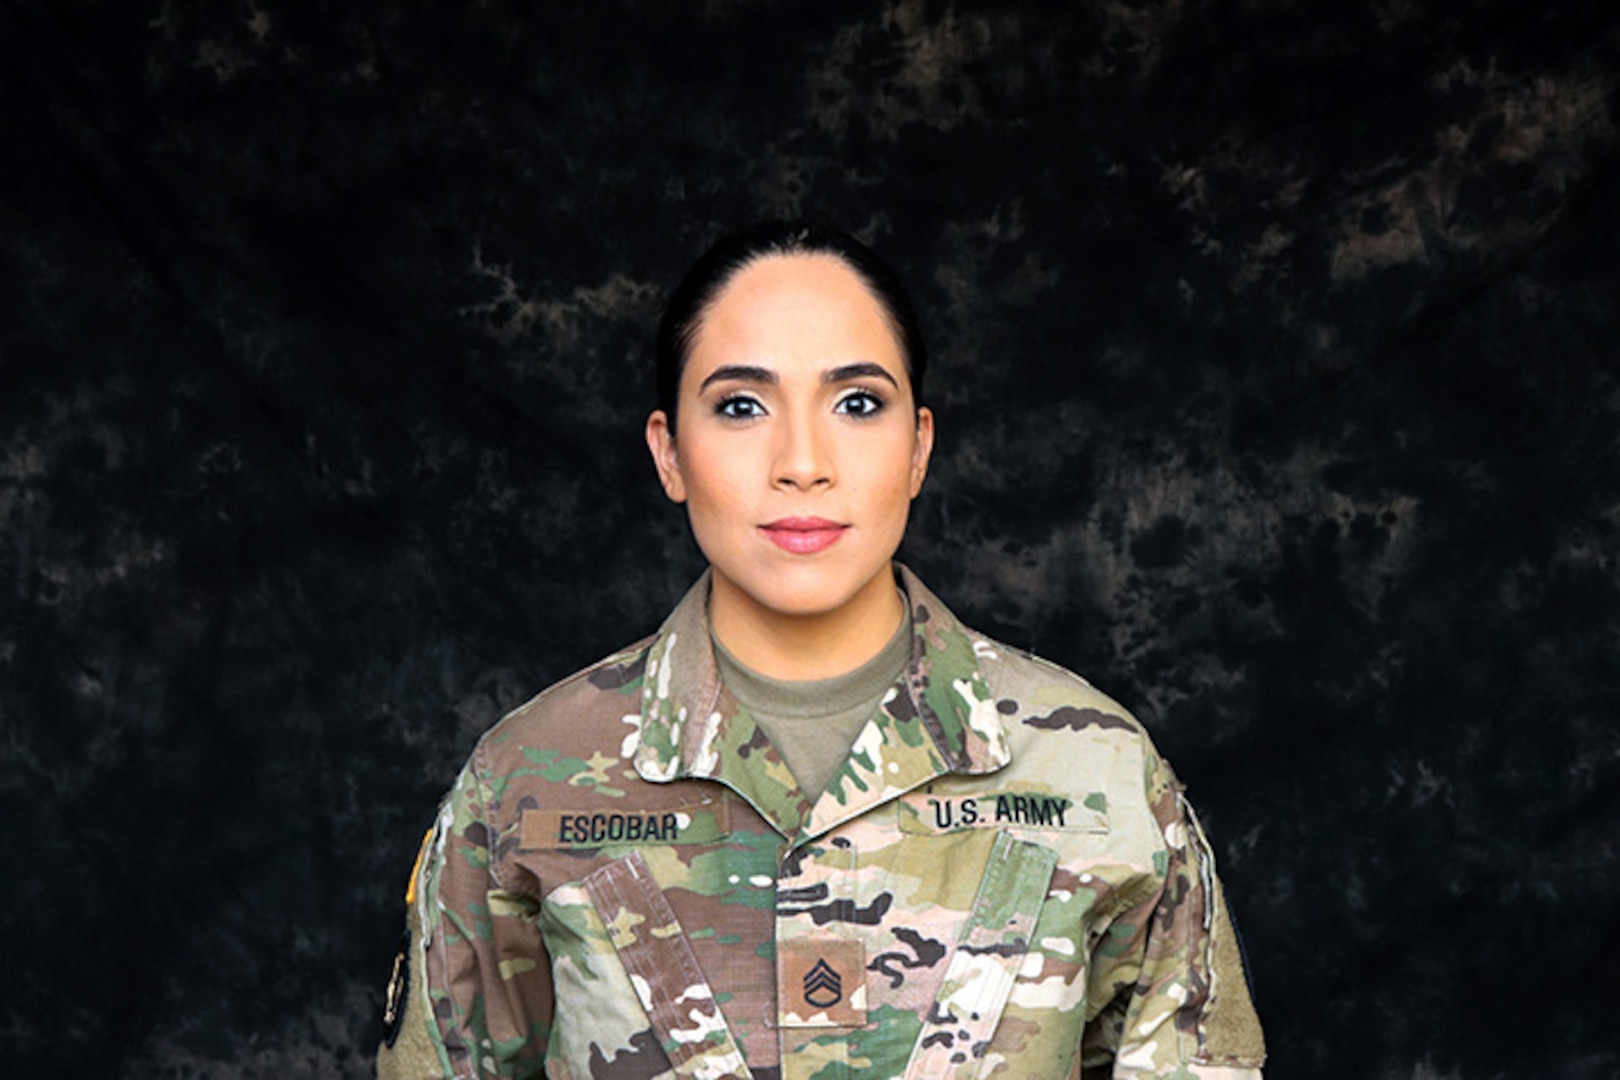 Army Staff Sgt. San Juanita Escobar, with the Texas Army National Guard, deployed to Djibouti where she was instrumental in coordinating a program that provided greater opportunities for women in the area. Back home, she uses her military experience in what has become a family tradition — beauty pageant competitions, where she was recently named Mrs. Texas Galaxy.